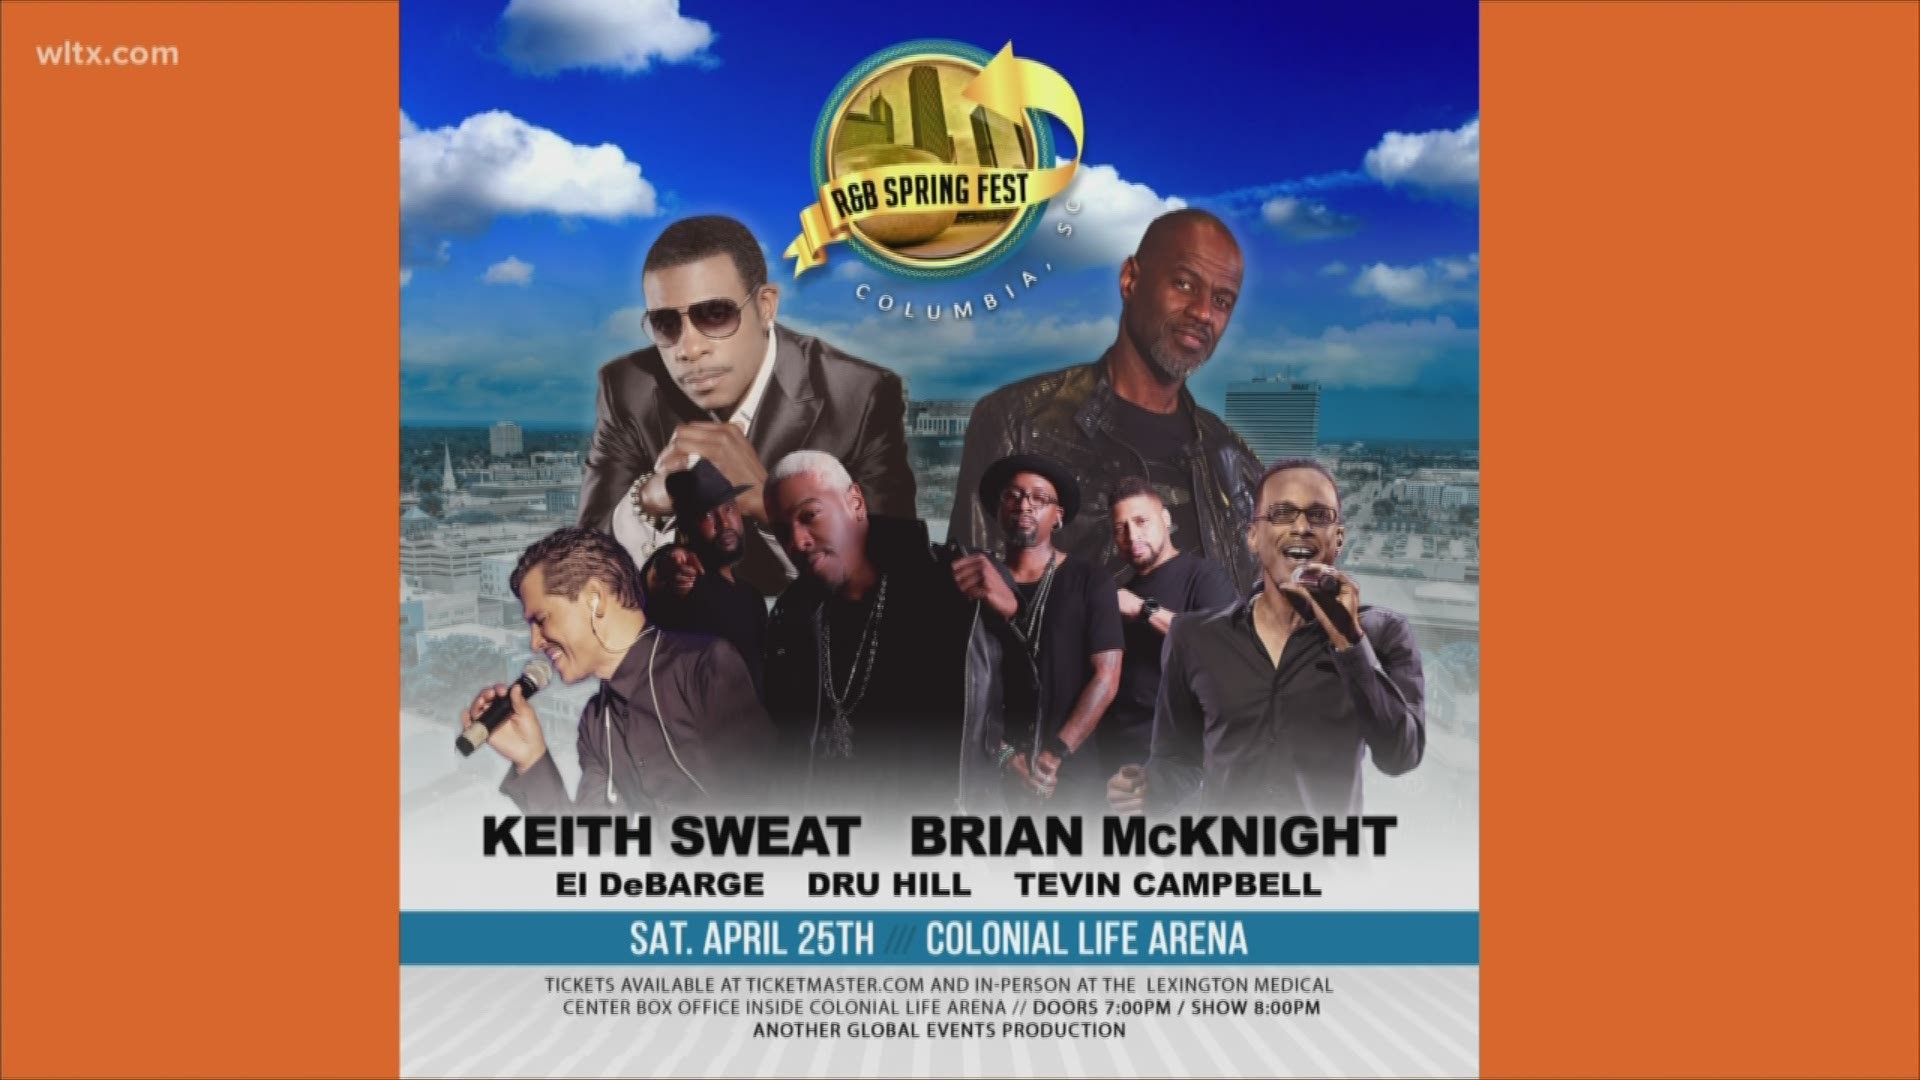 The lineup includes Keith Sweat, Brian McKnight, El DaBarge, Dru Hill and Tevin Campbell.
The concert is set for Saturday, April 25th at the Colonial Life Arena.